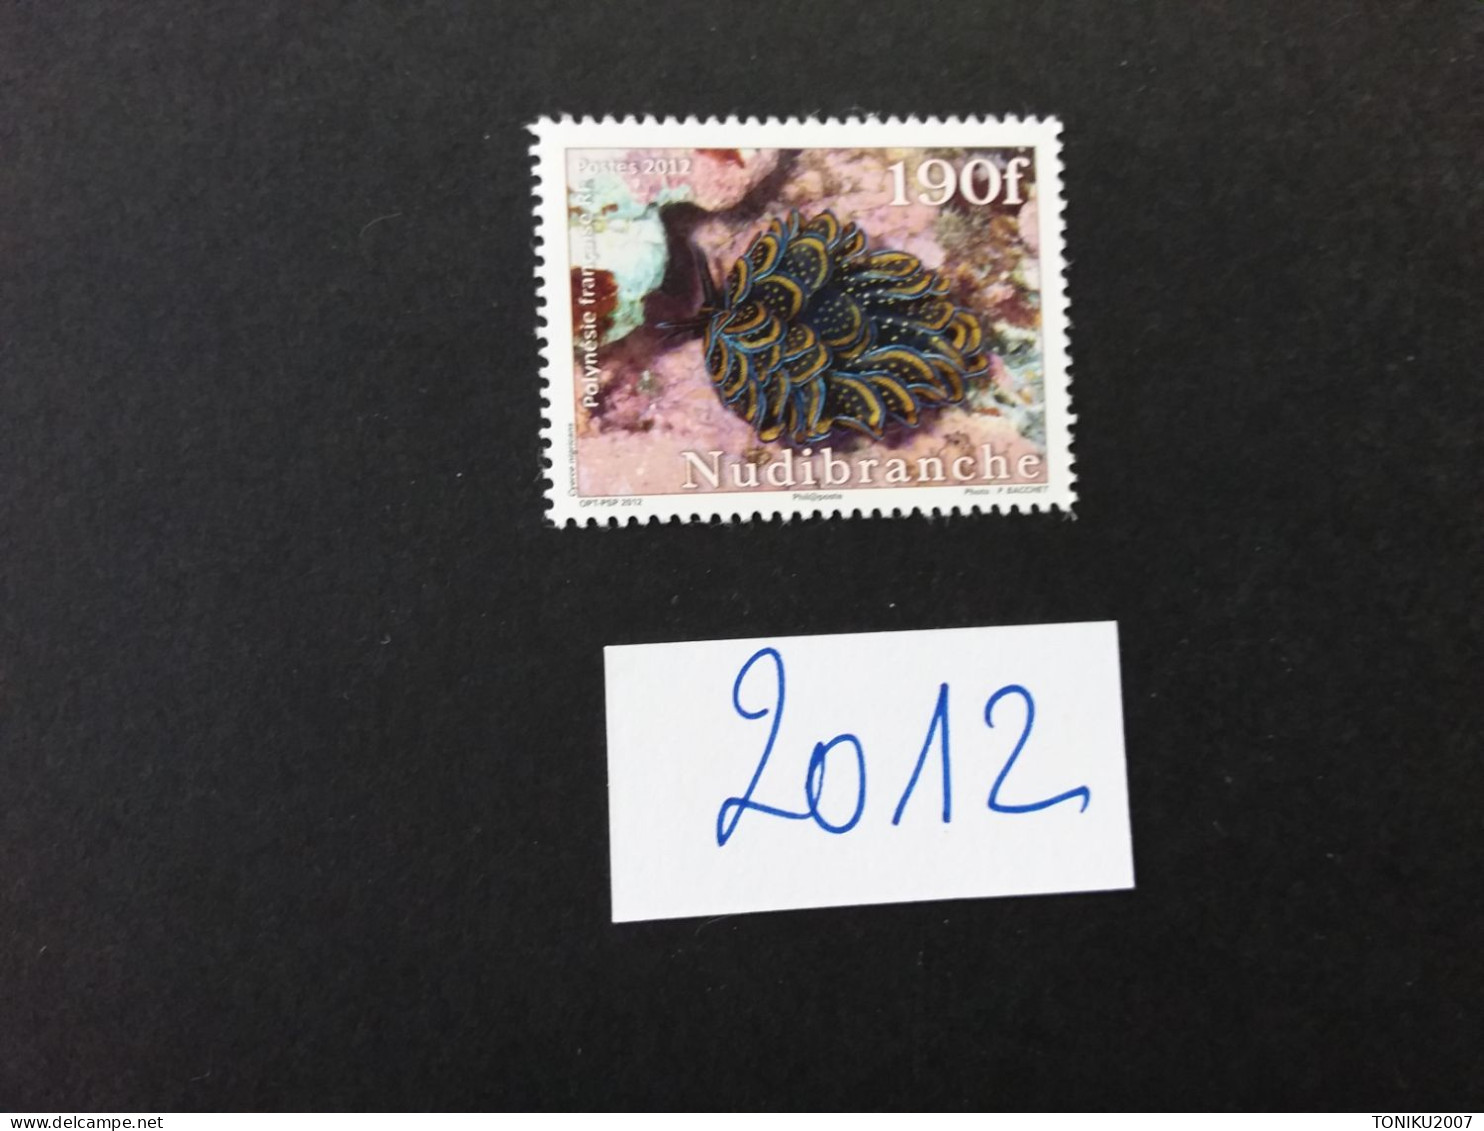 POLYNESIE FRANCAISE 2012** - MNH - Unused Stamps